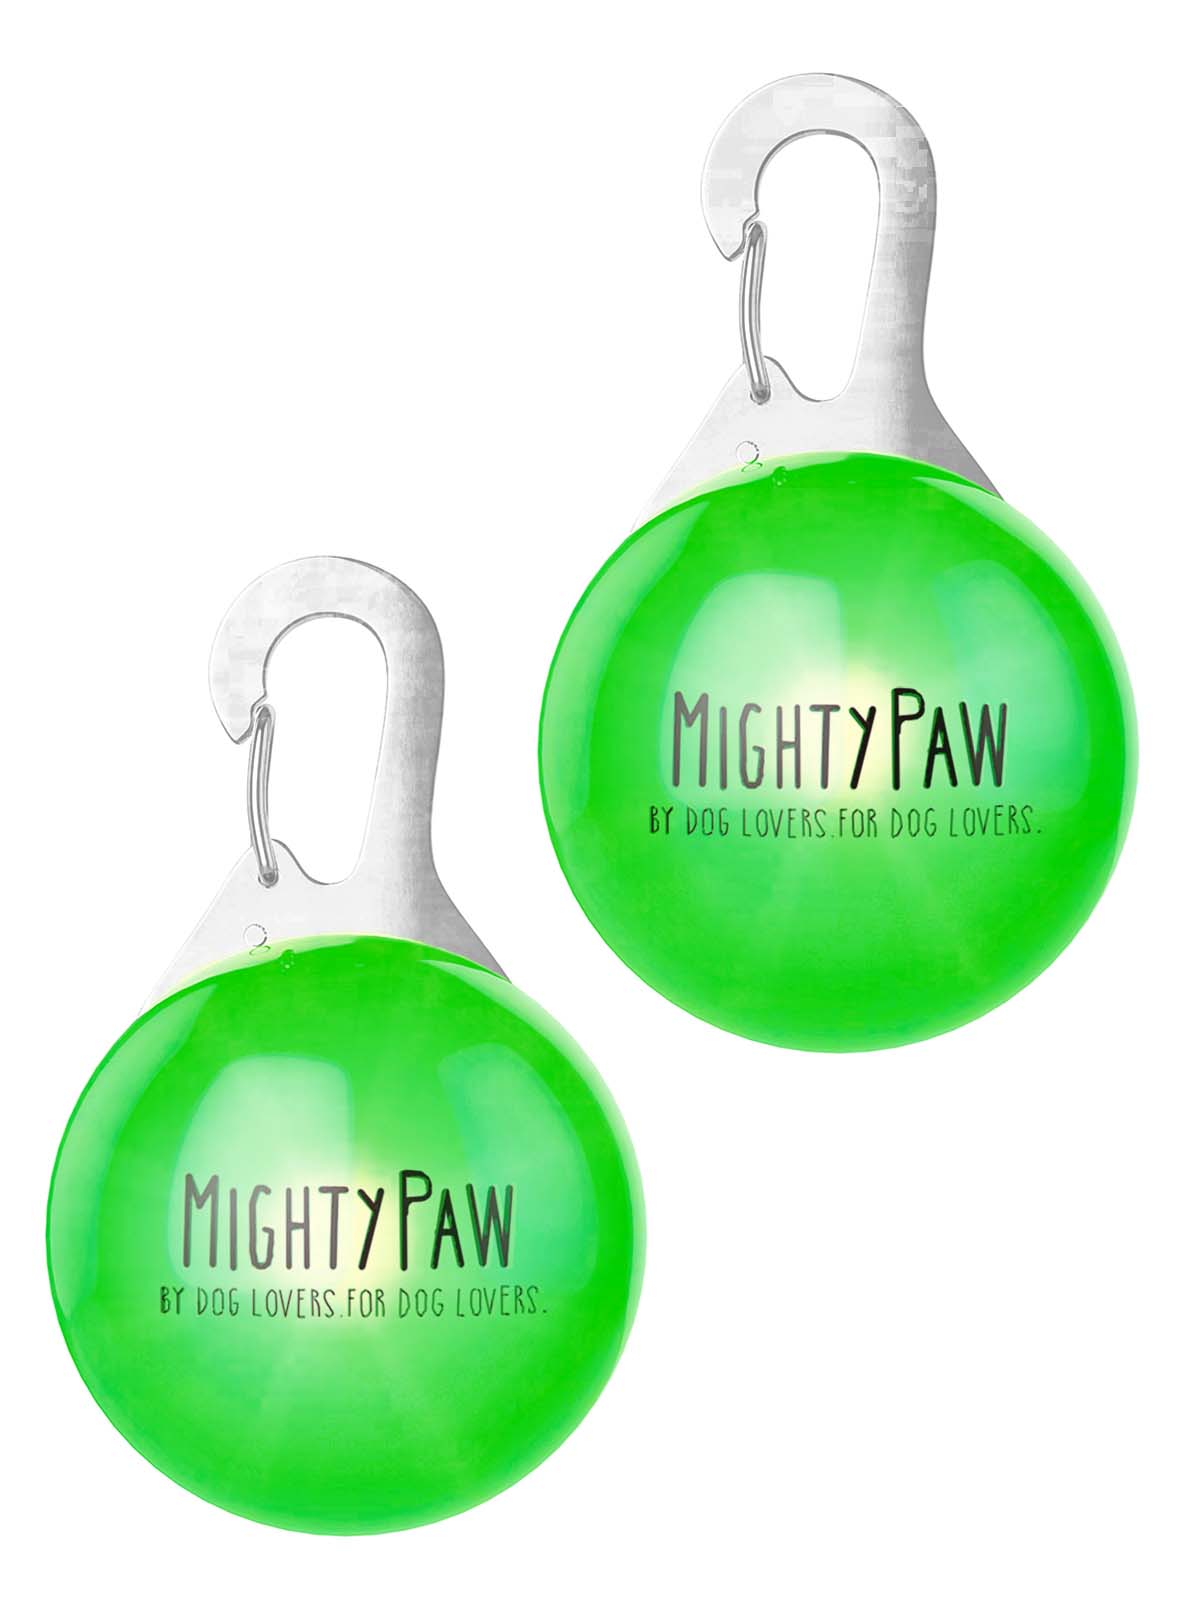 Mighty Paw Dog Tag Carabiner Clips (3 Pack)  Strong Weather Resistant  Quick Clip ID Holders. Easily Switch Tags Between Your Pets Collars Or  Attach Keys and Poop Bag Holders. Works for